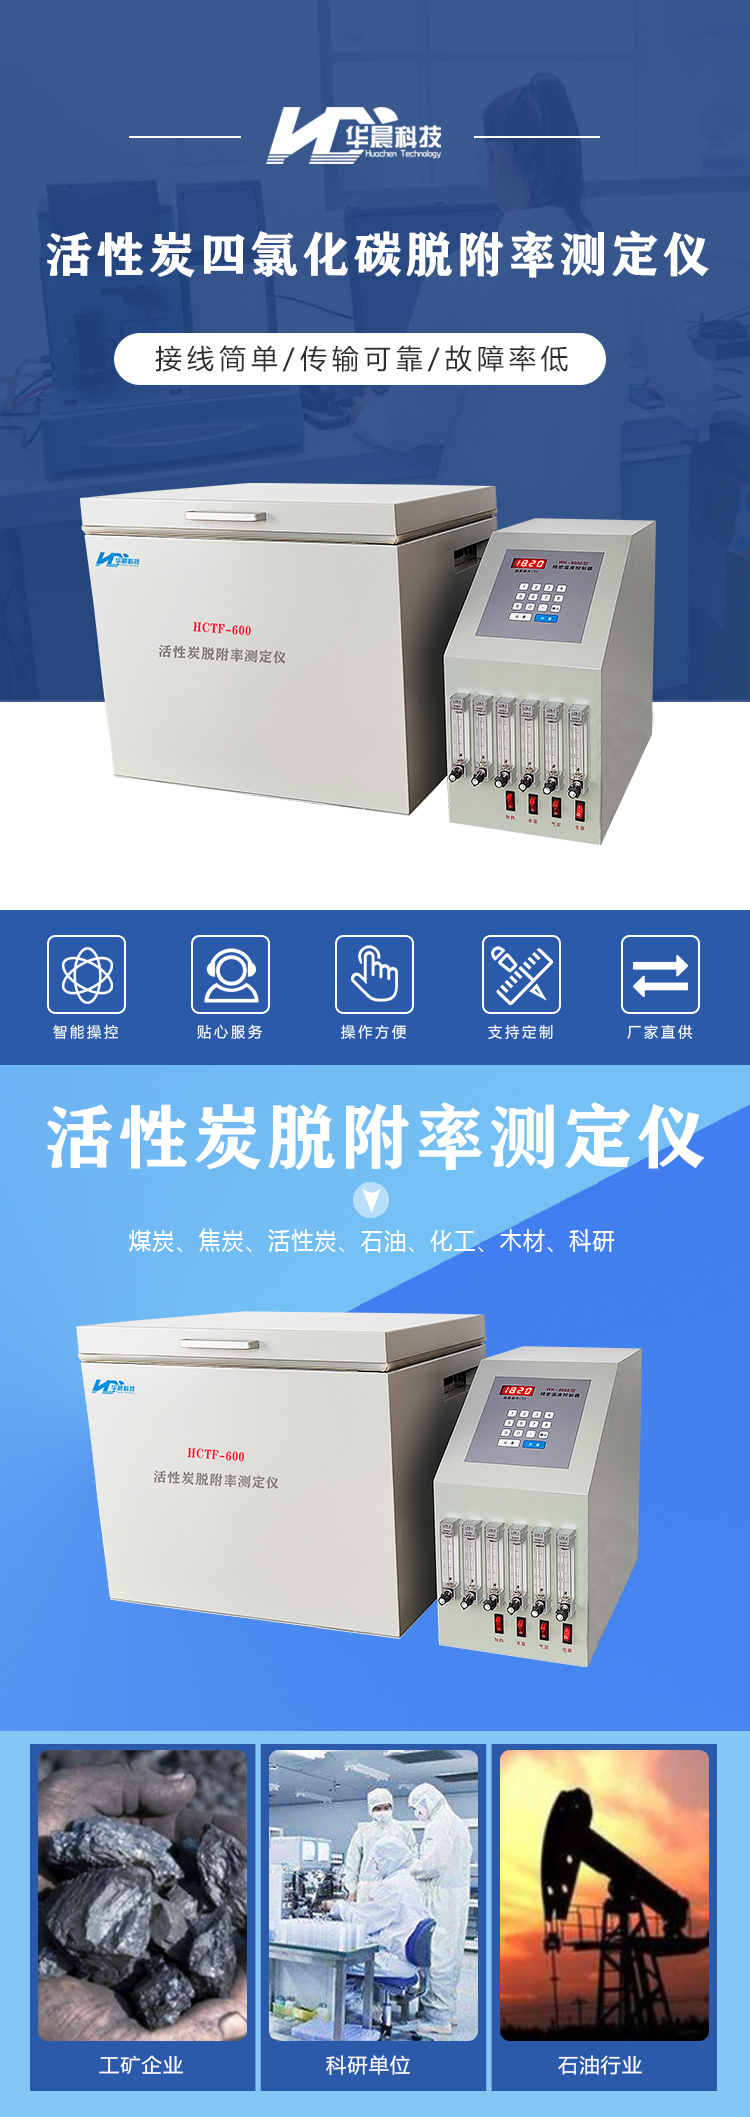 Activated carbon tetrachloride desorption rate tester, detection desorption value testing device, instrument and equipment